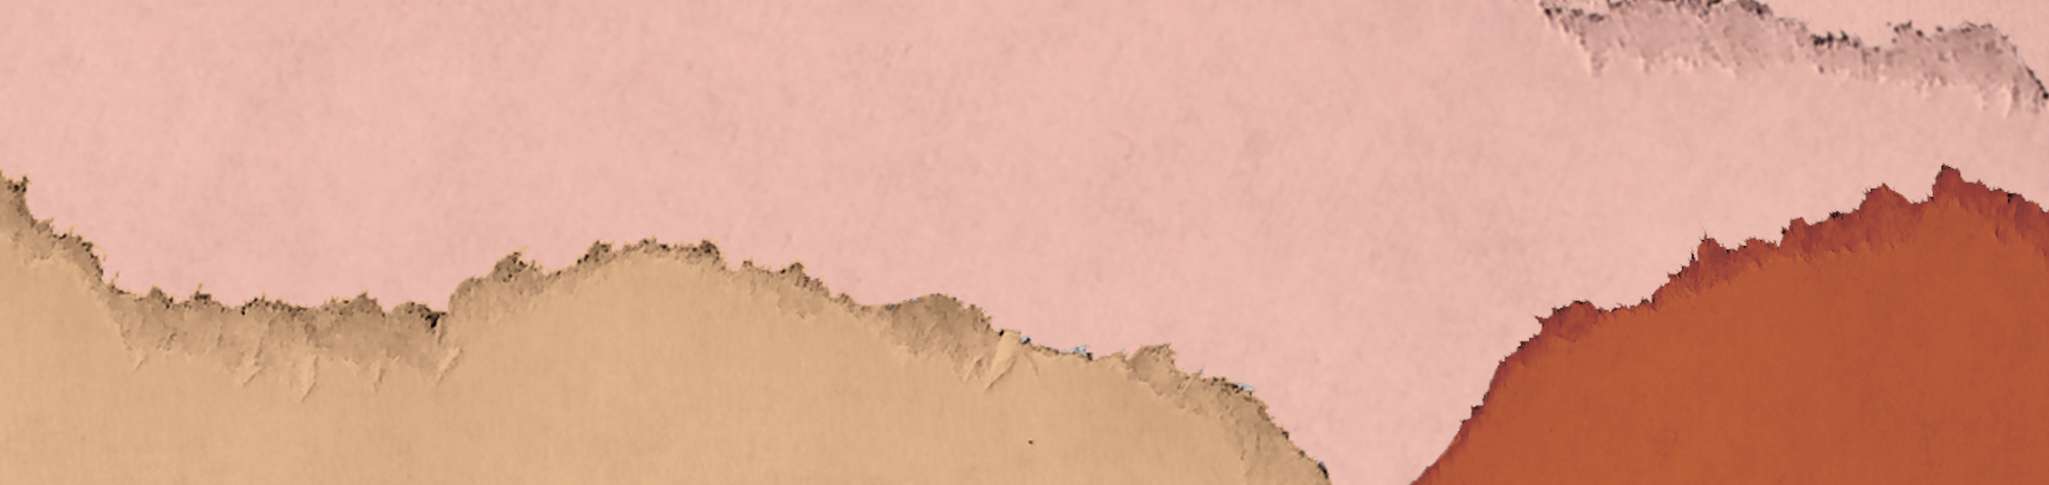 textured pink and tan background